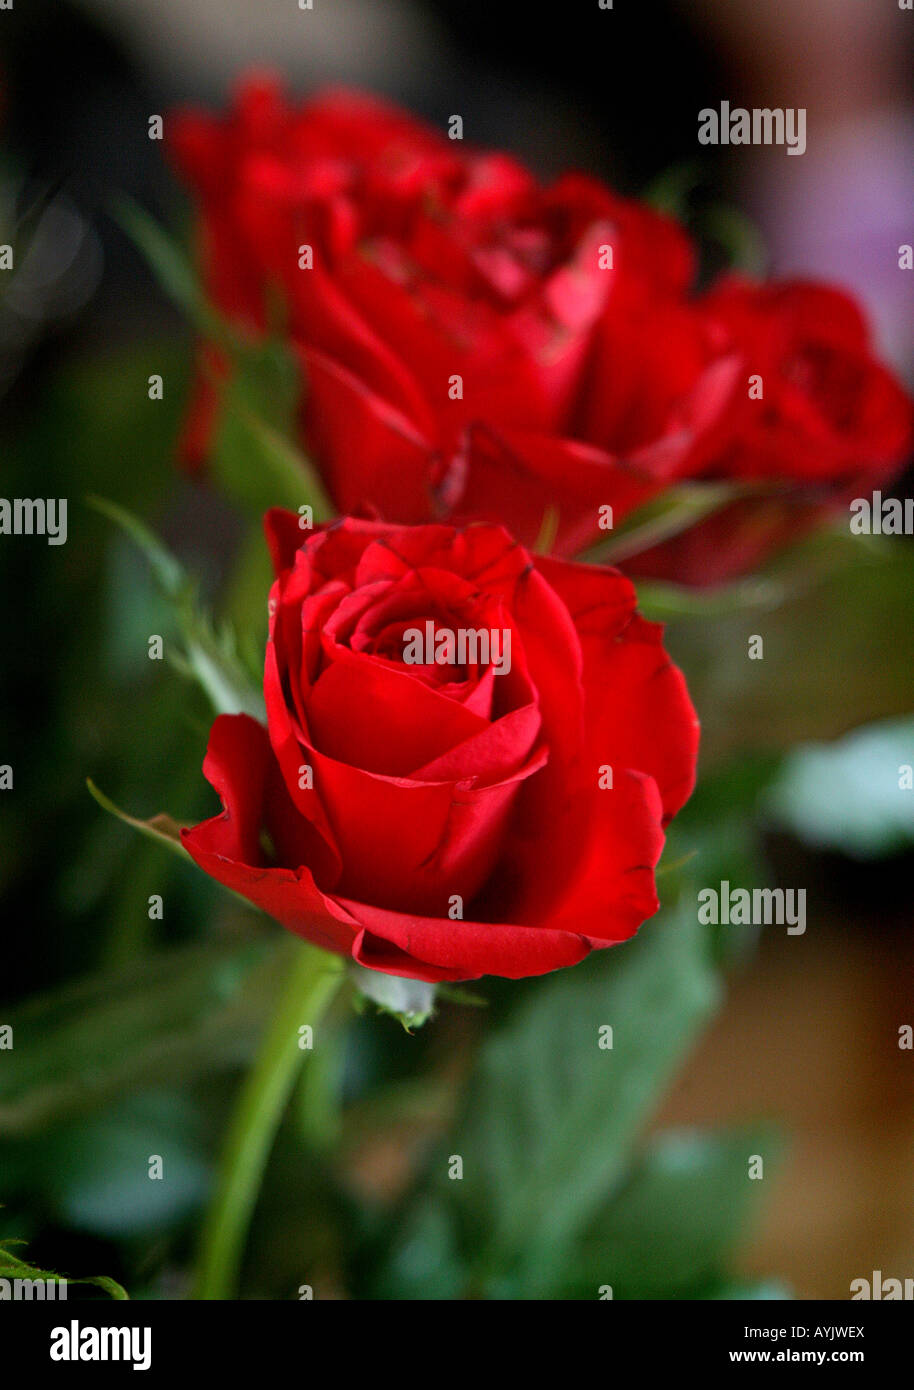 A bouquet of red roses Stock Photo